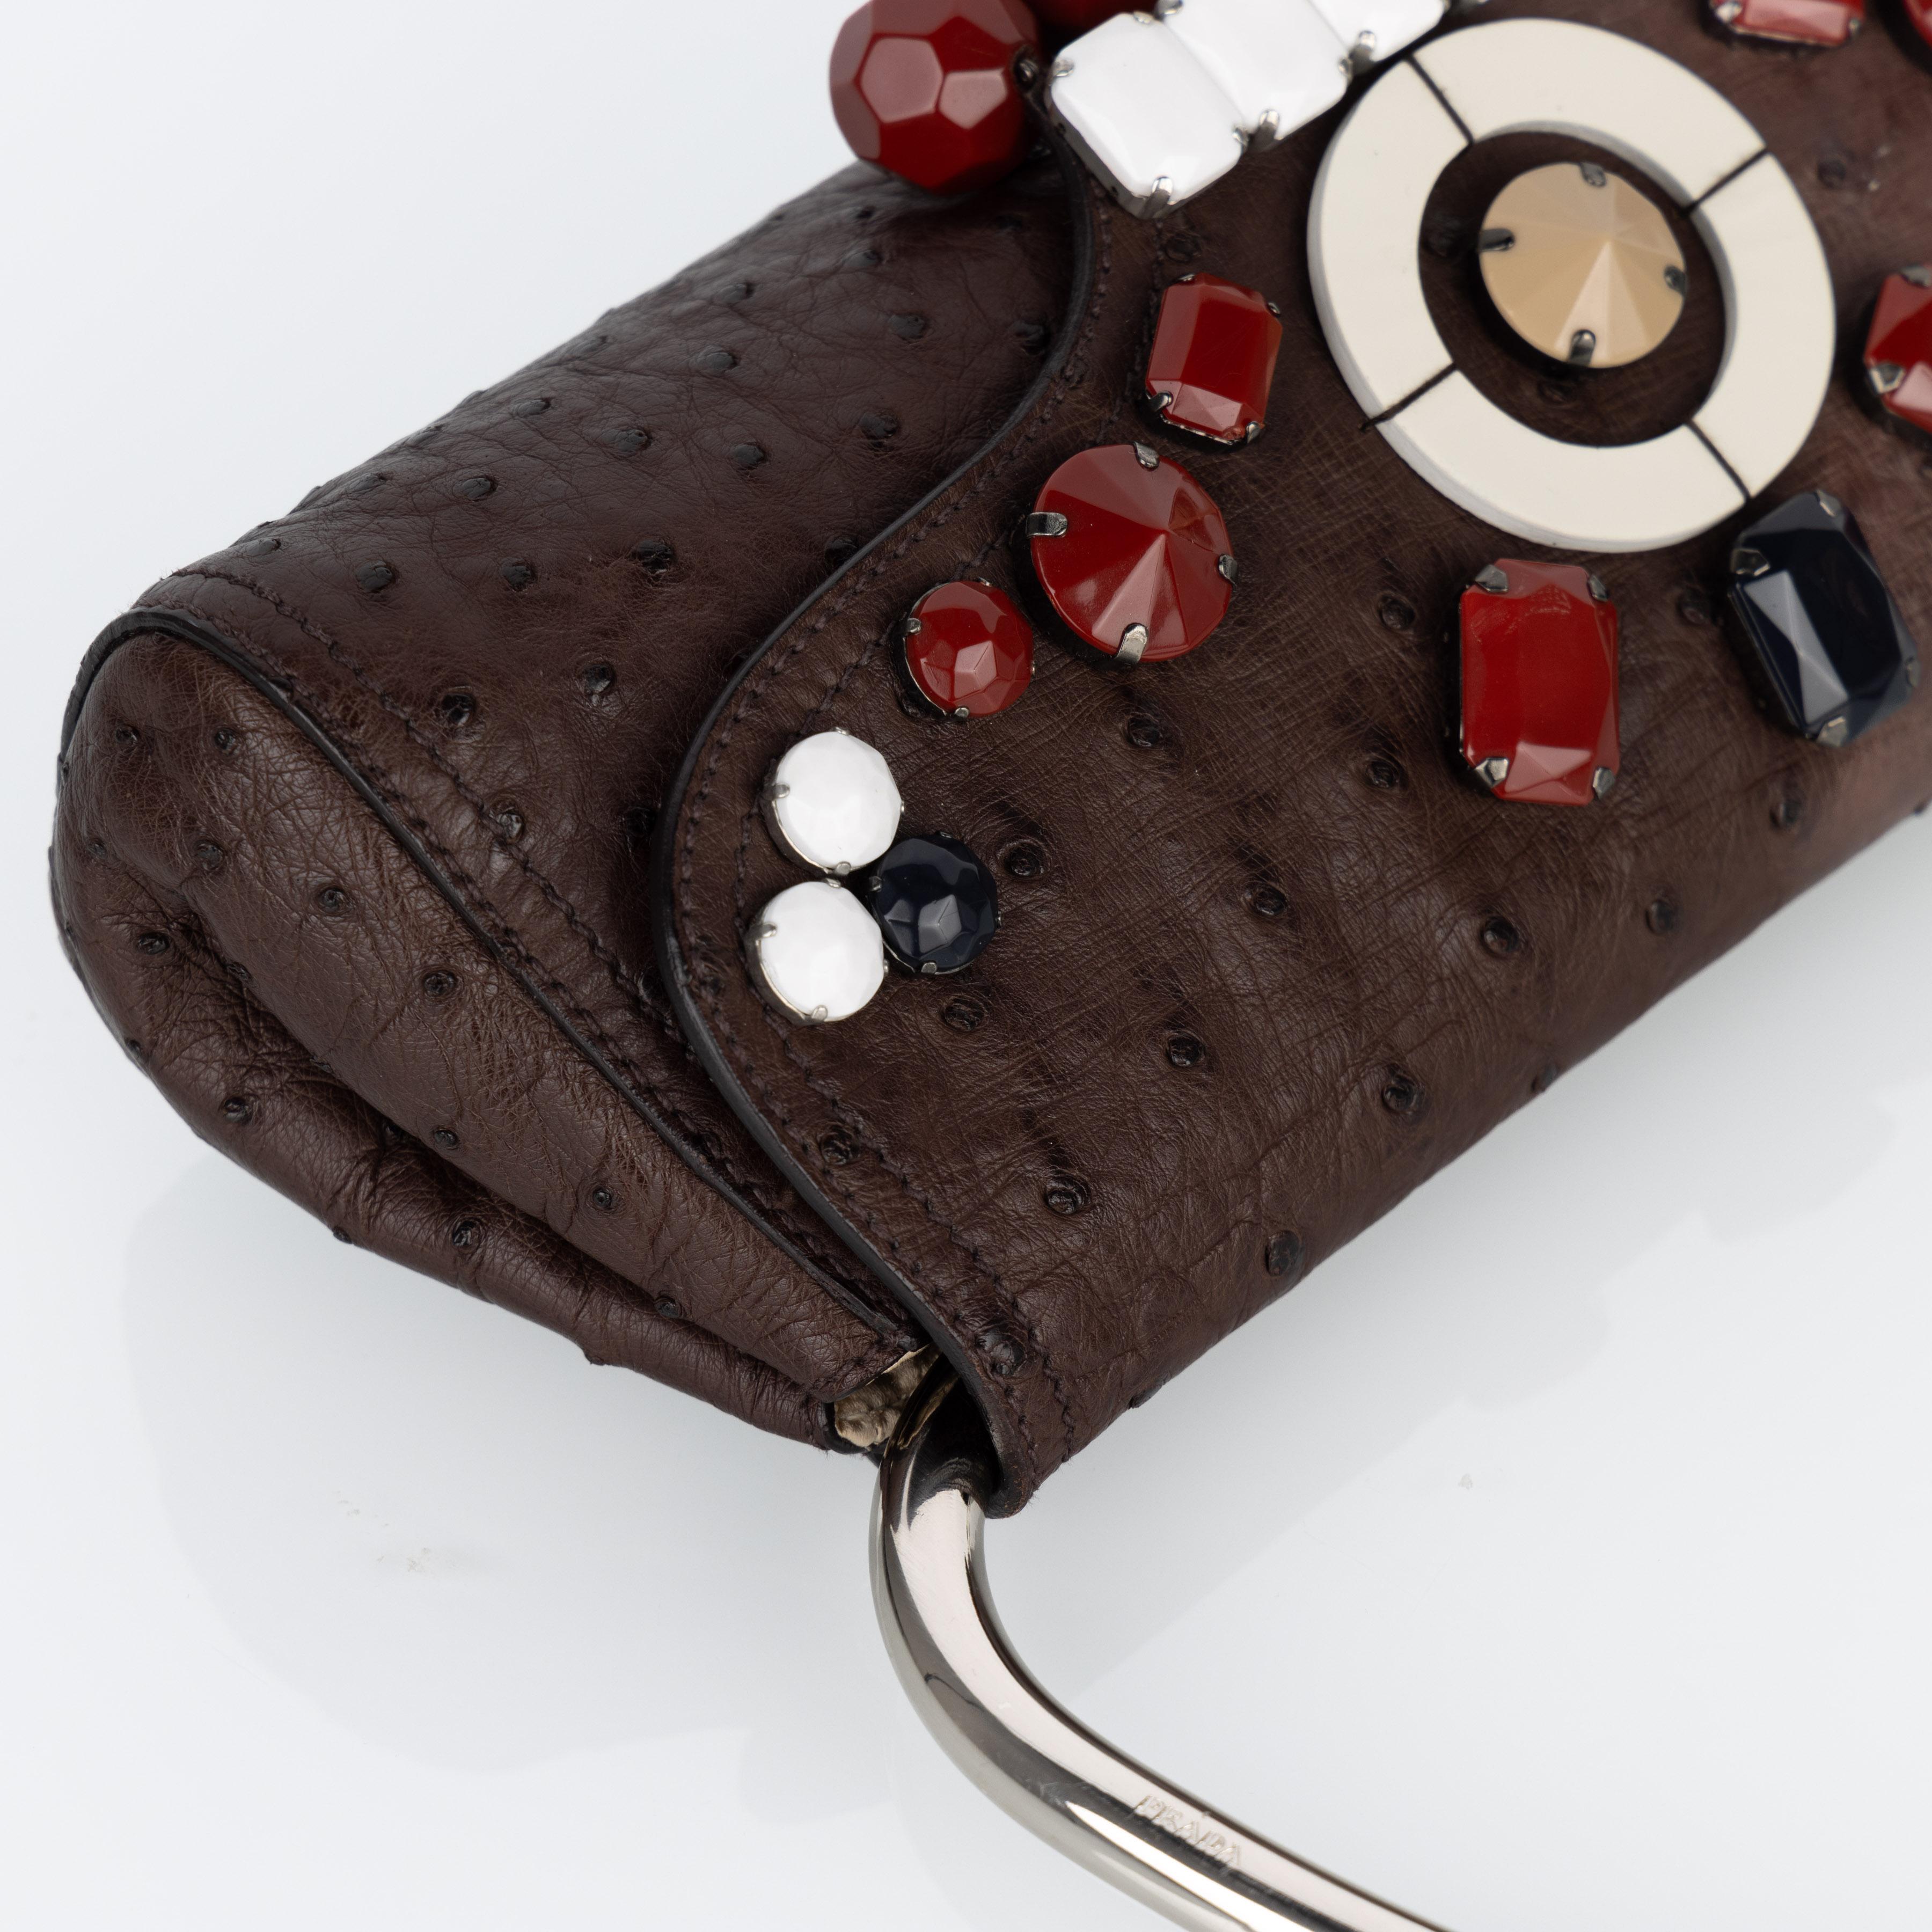 Prada Brown Ostrich Leather Jewel Embellished Swing Bag SS 2003 Archival Piece For Sale 6